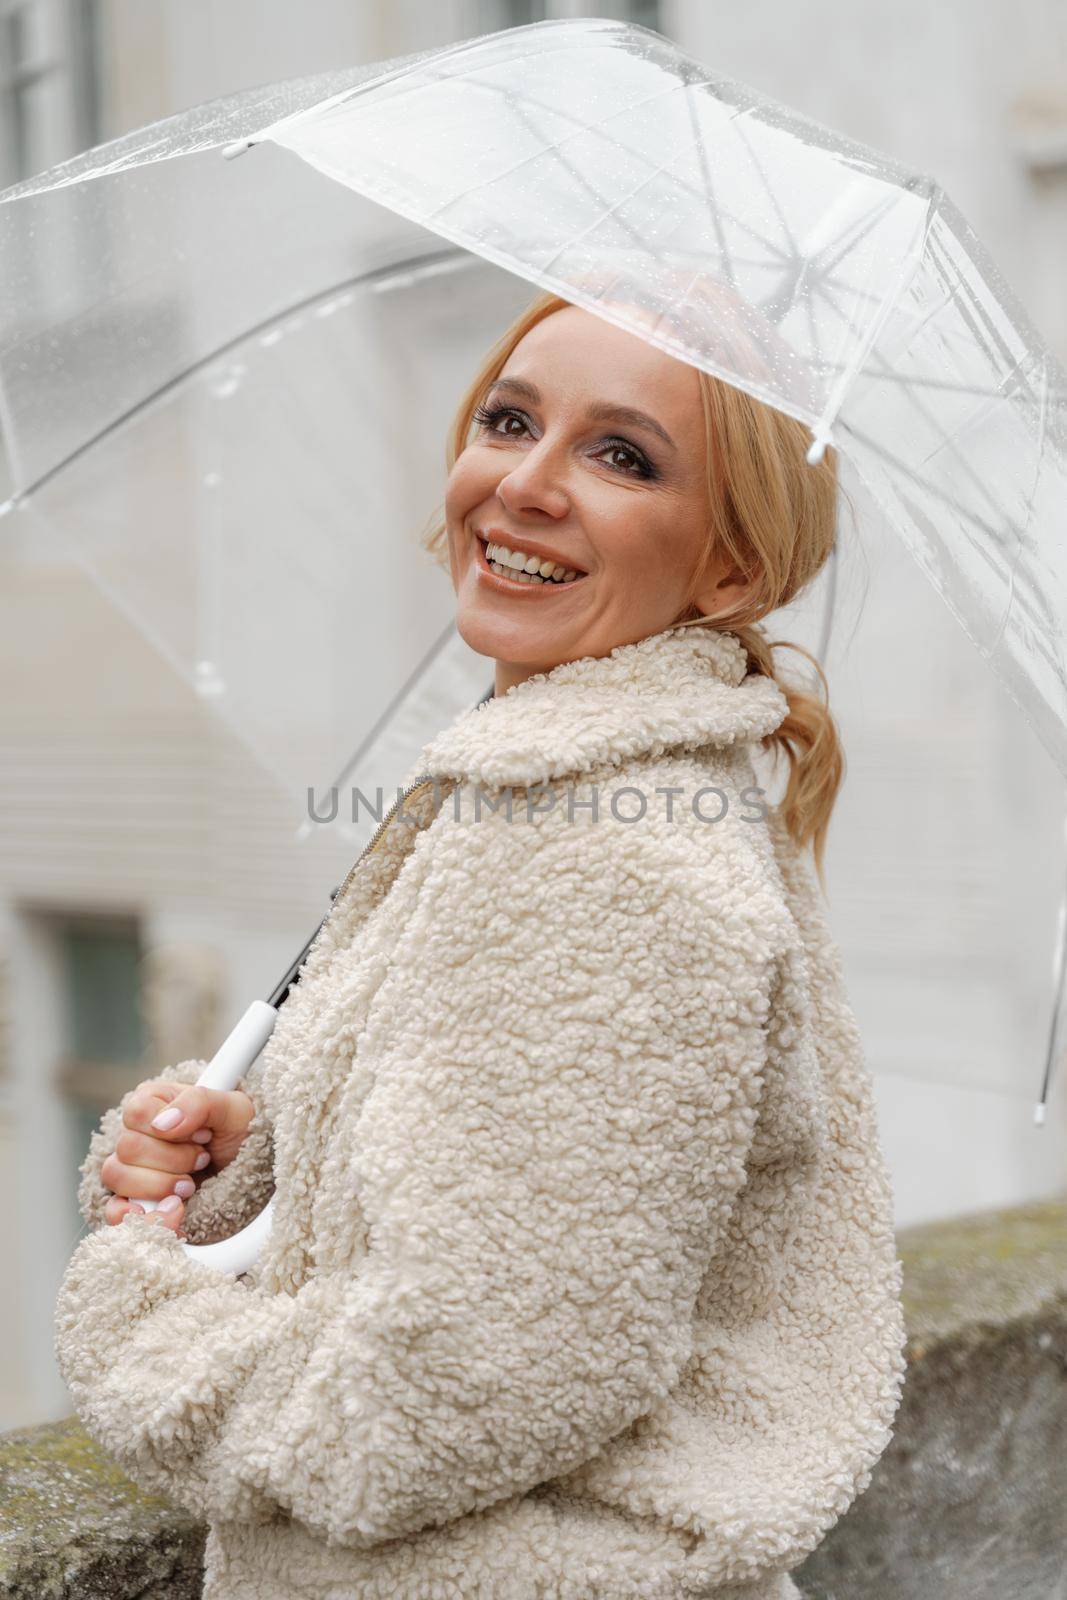 The blonde stands under a transparent umbrella during the rain. The fall season. Rear view. The woman is dressed in a black lace dress, her hair pulled back in a ponytail. by Matiunina